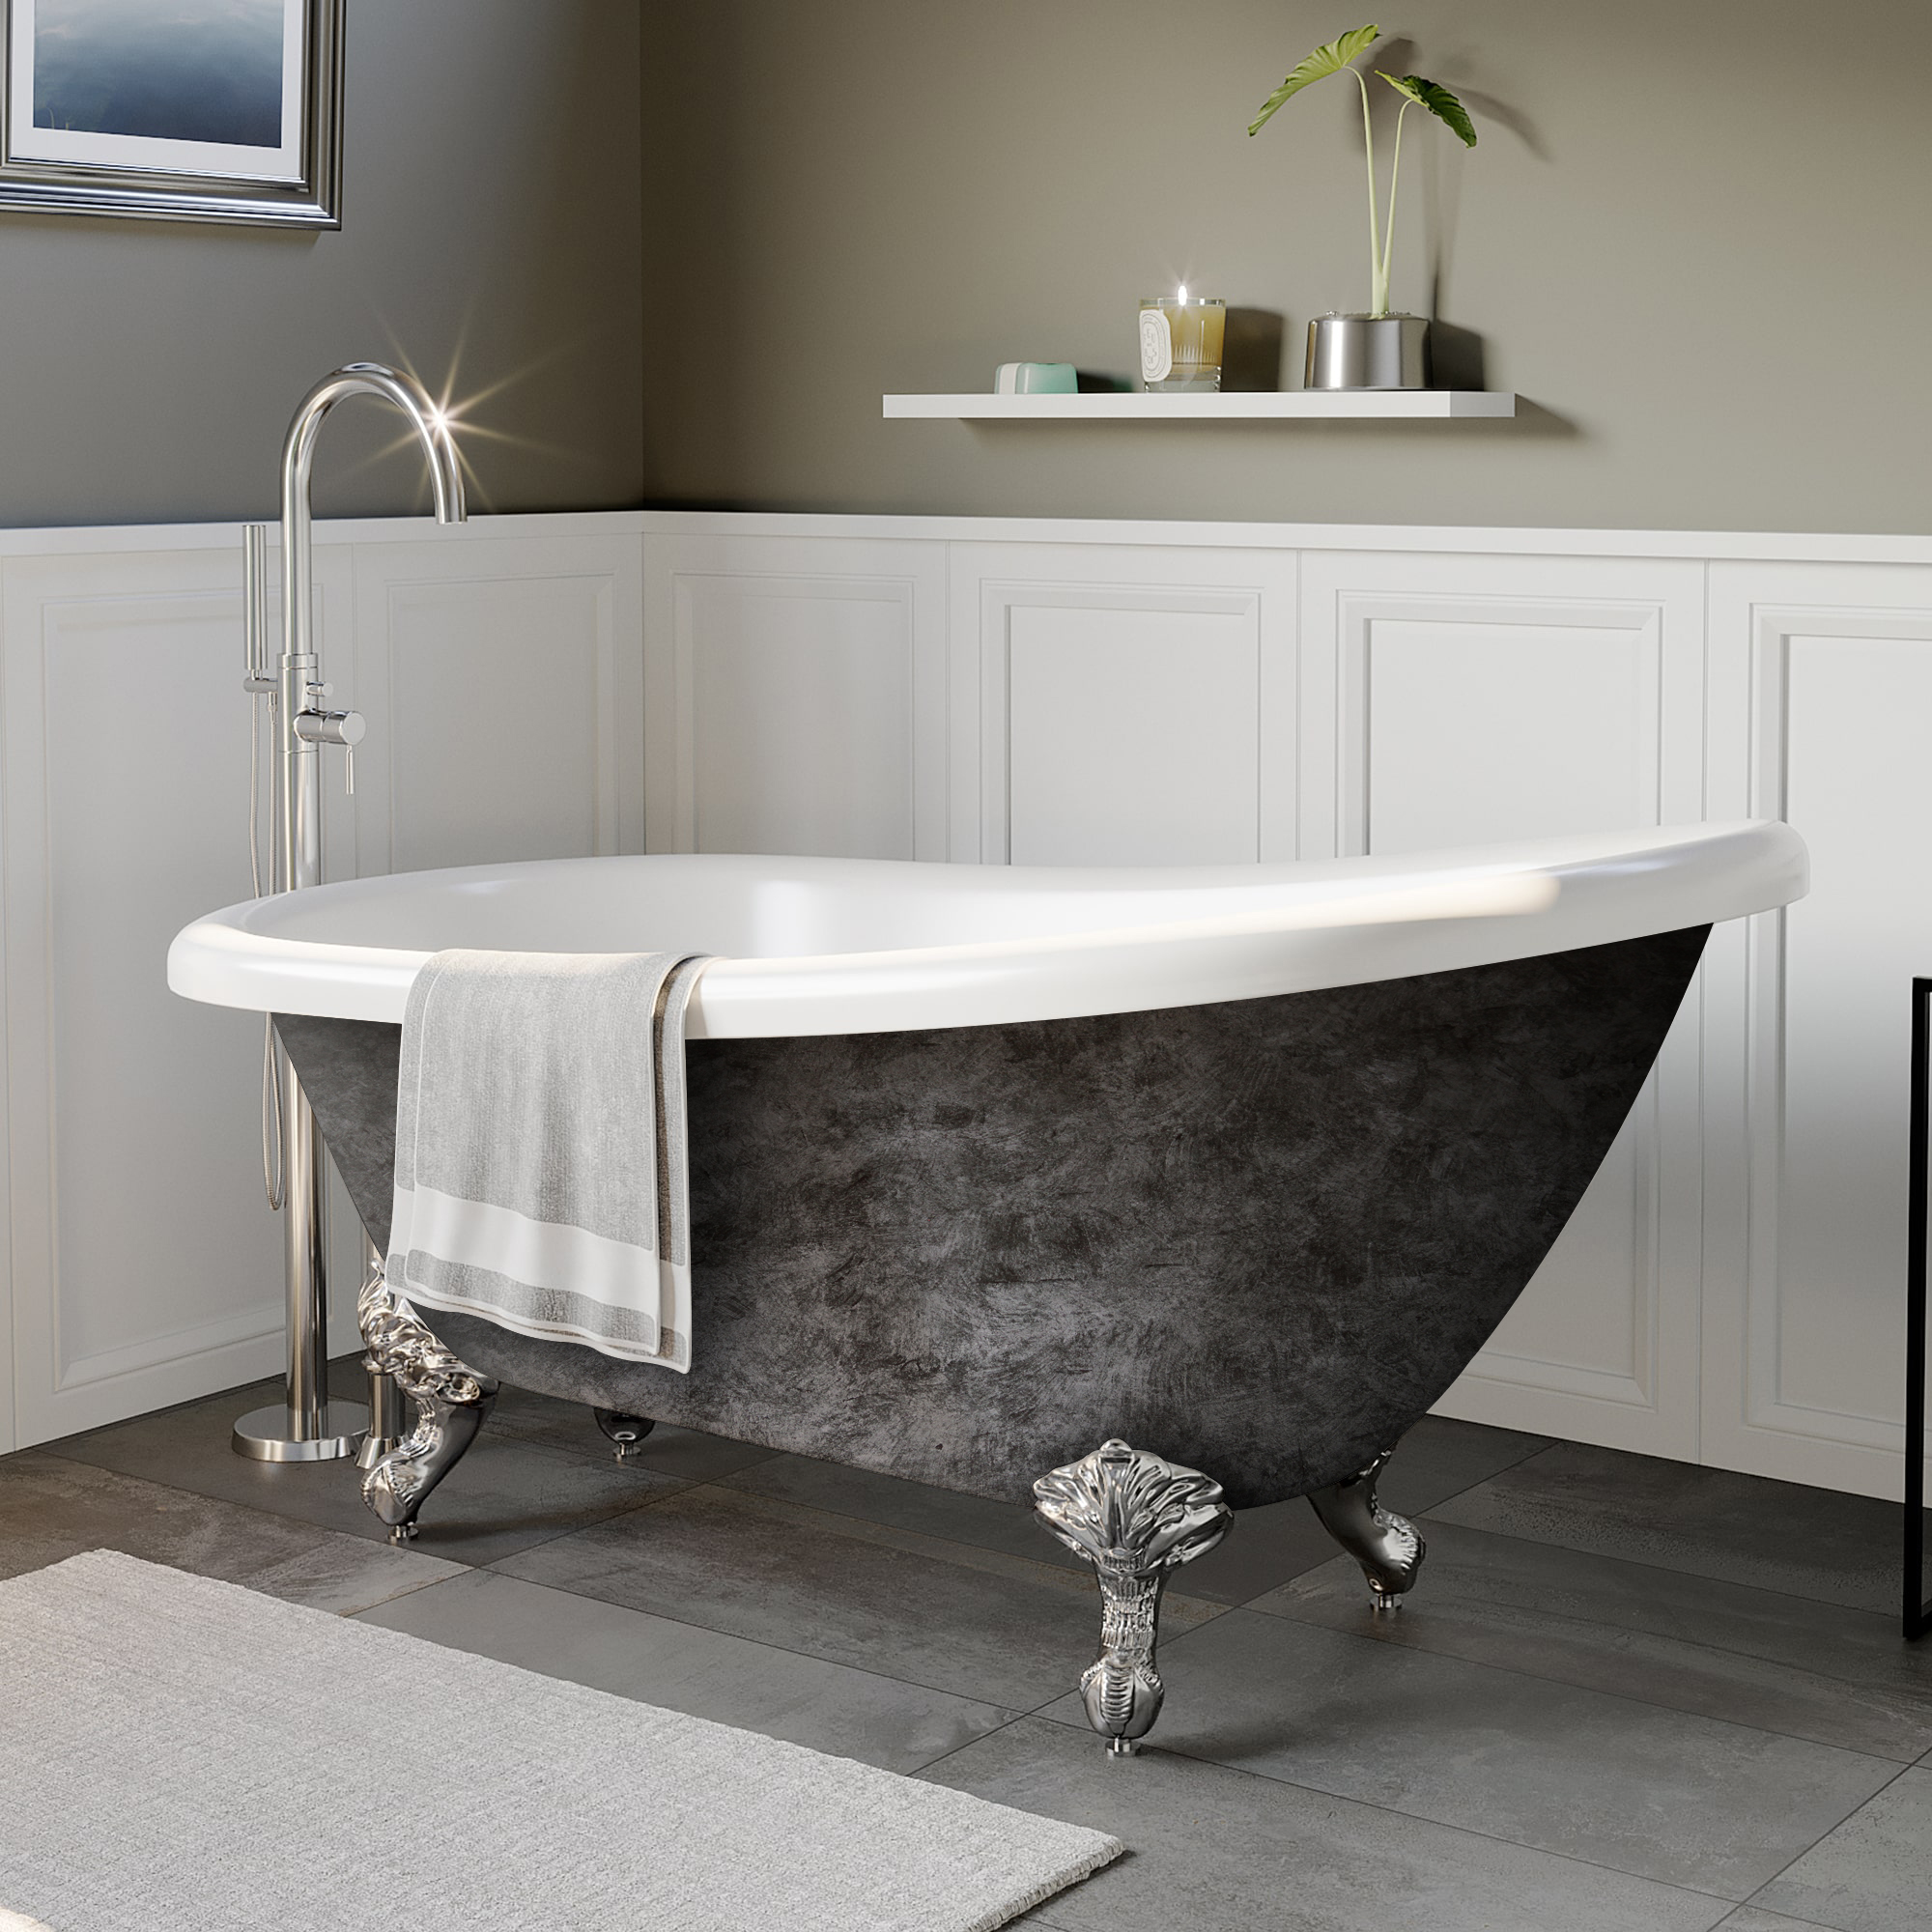 Cambridge Scorched Platinum 67” x 28” Acrylic Slipper Bathtub with No Faucet Holes and Polished Chrome Ball and Claw Feet